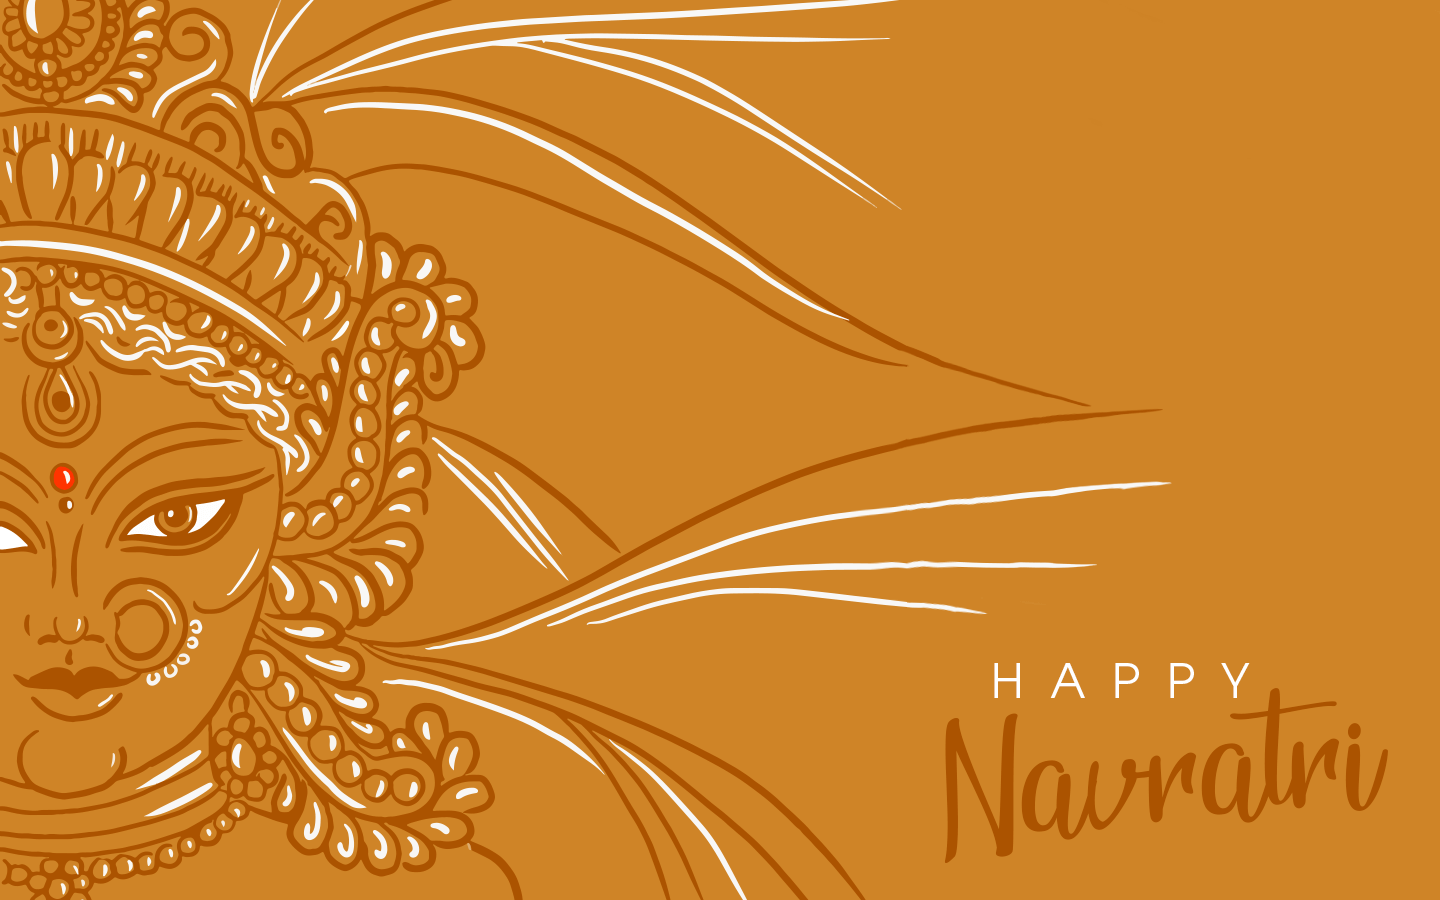 Happy Navratri Wishes - May This Dussehra Burn All Your Worries - HD Wallpaper 